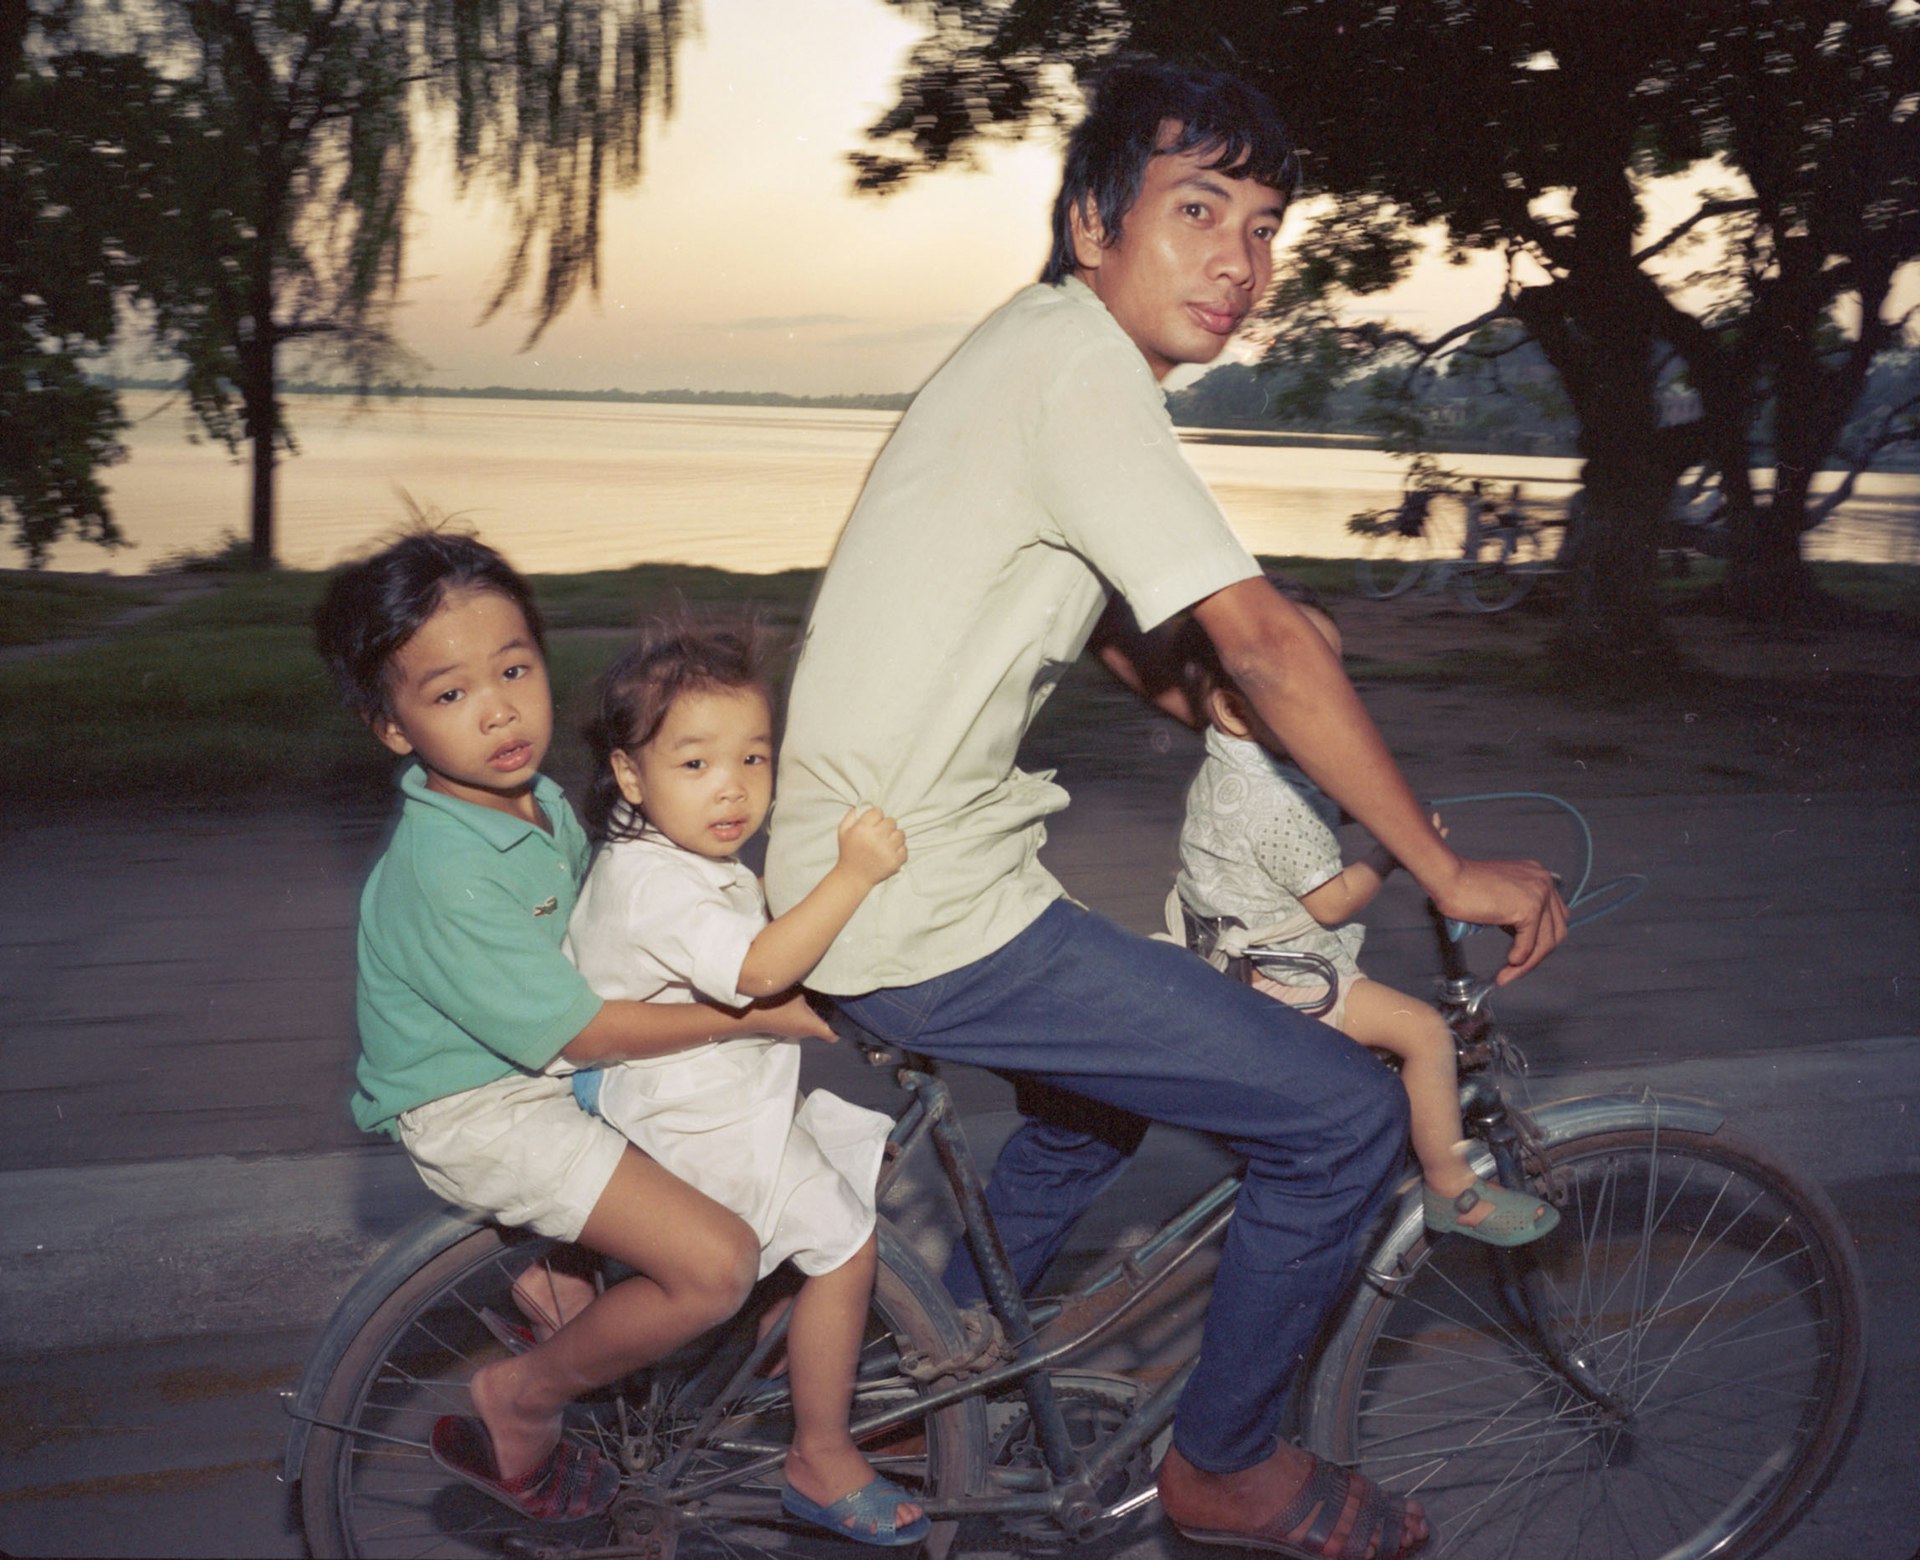 Motobike and Bicycles Going Home, 1987 © William E. Crawford